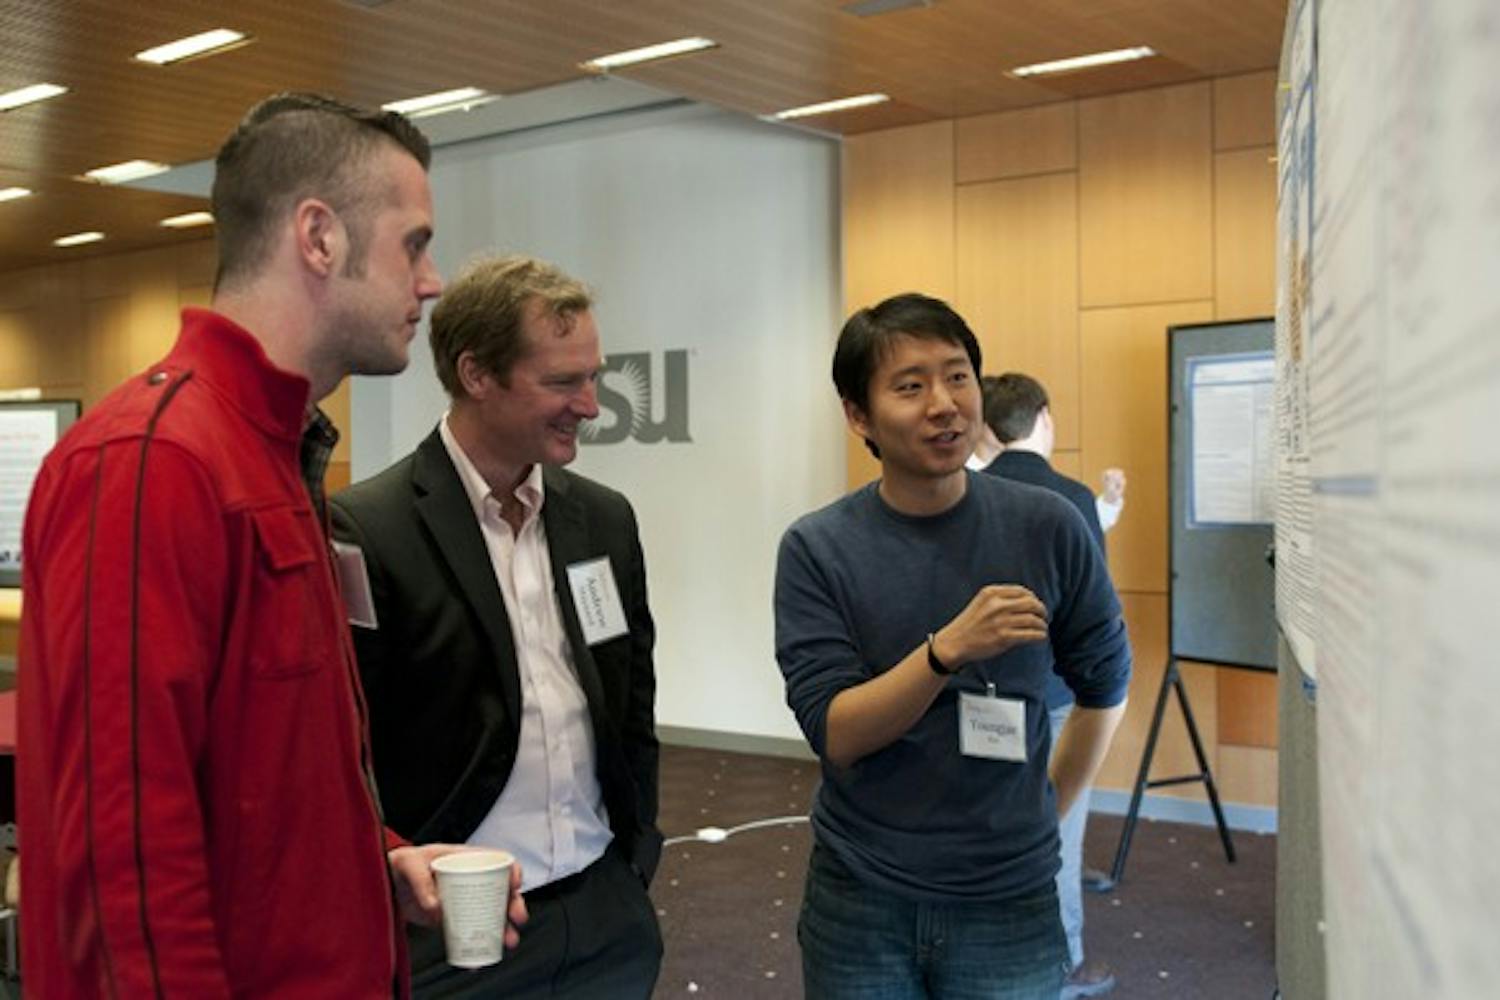 Graduate student  Youngjae Kim (right) presents his research project on the current status and future direction for nanotechnology regulations to graduate student Jathan Sadowski (left) and Andrew Maynard (center) with the board for the Center for Nanotechnology in Society at ASU. Several graduate students met at the MU on Friday to present their projects to members of the board. (Photo by Molly J Smith) 